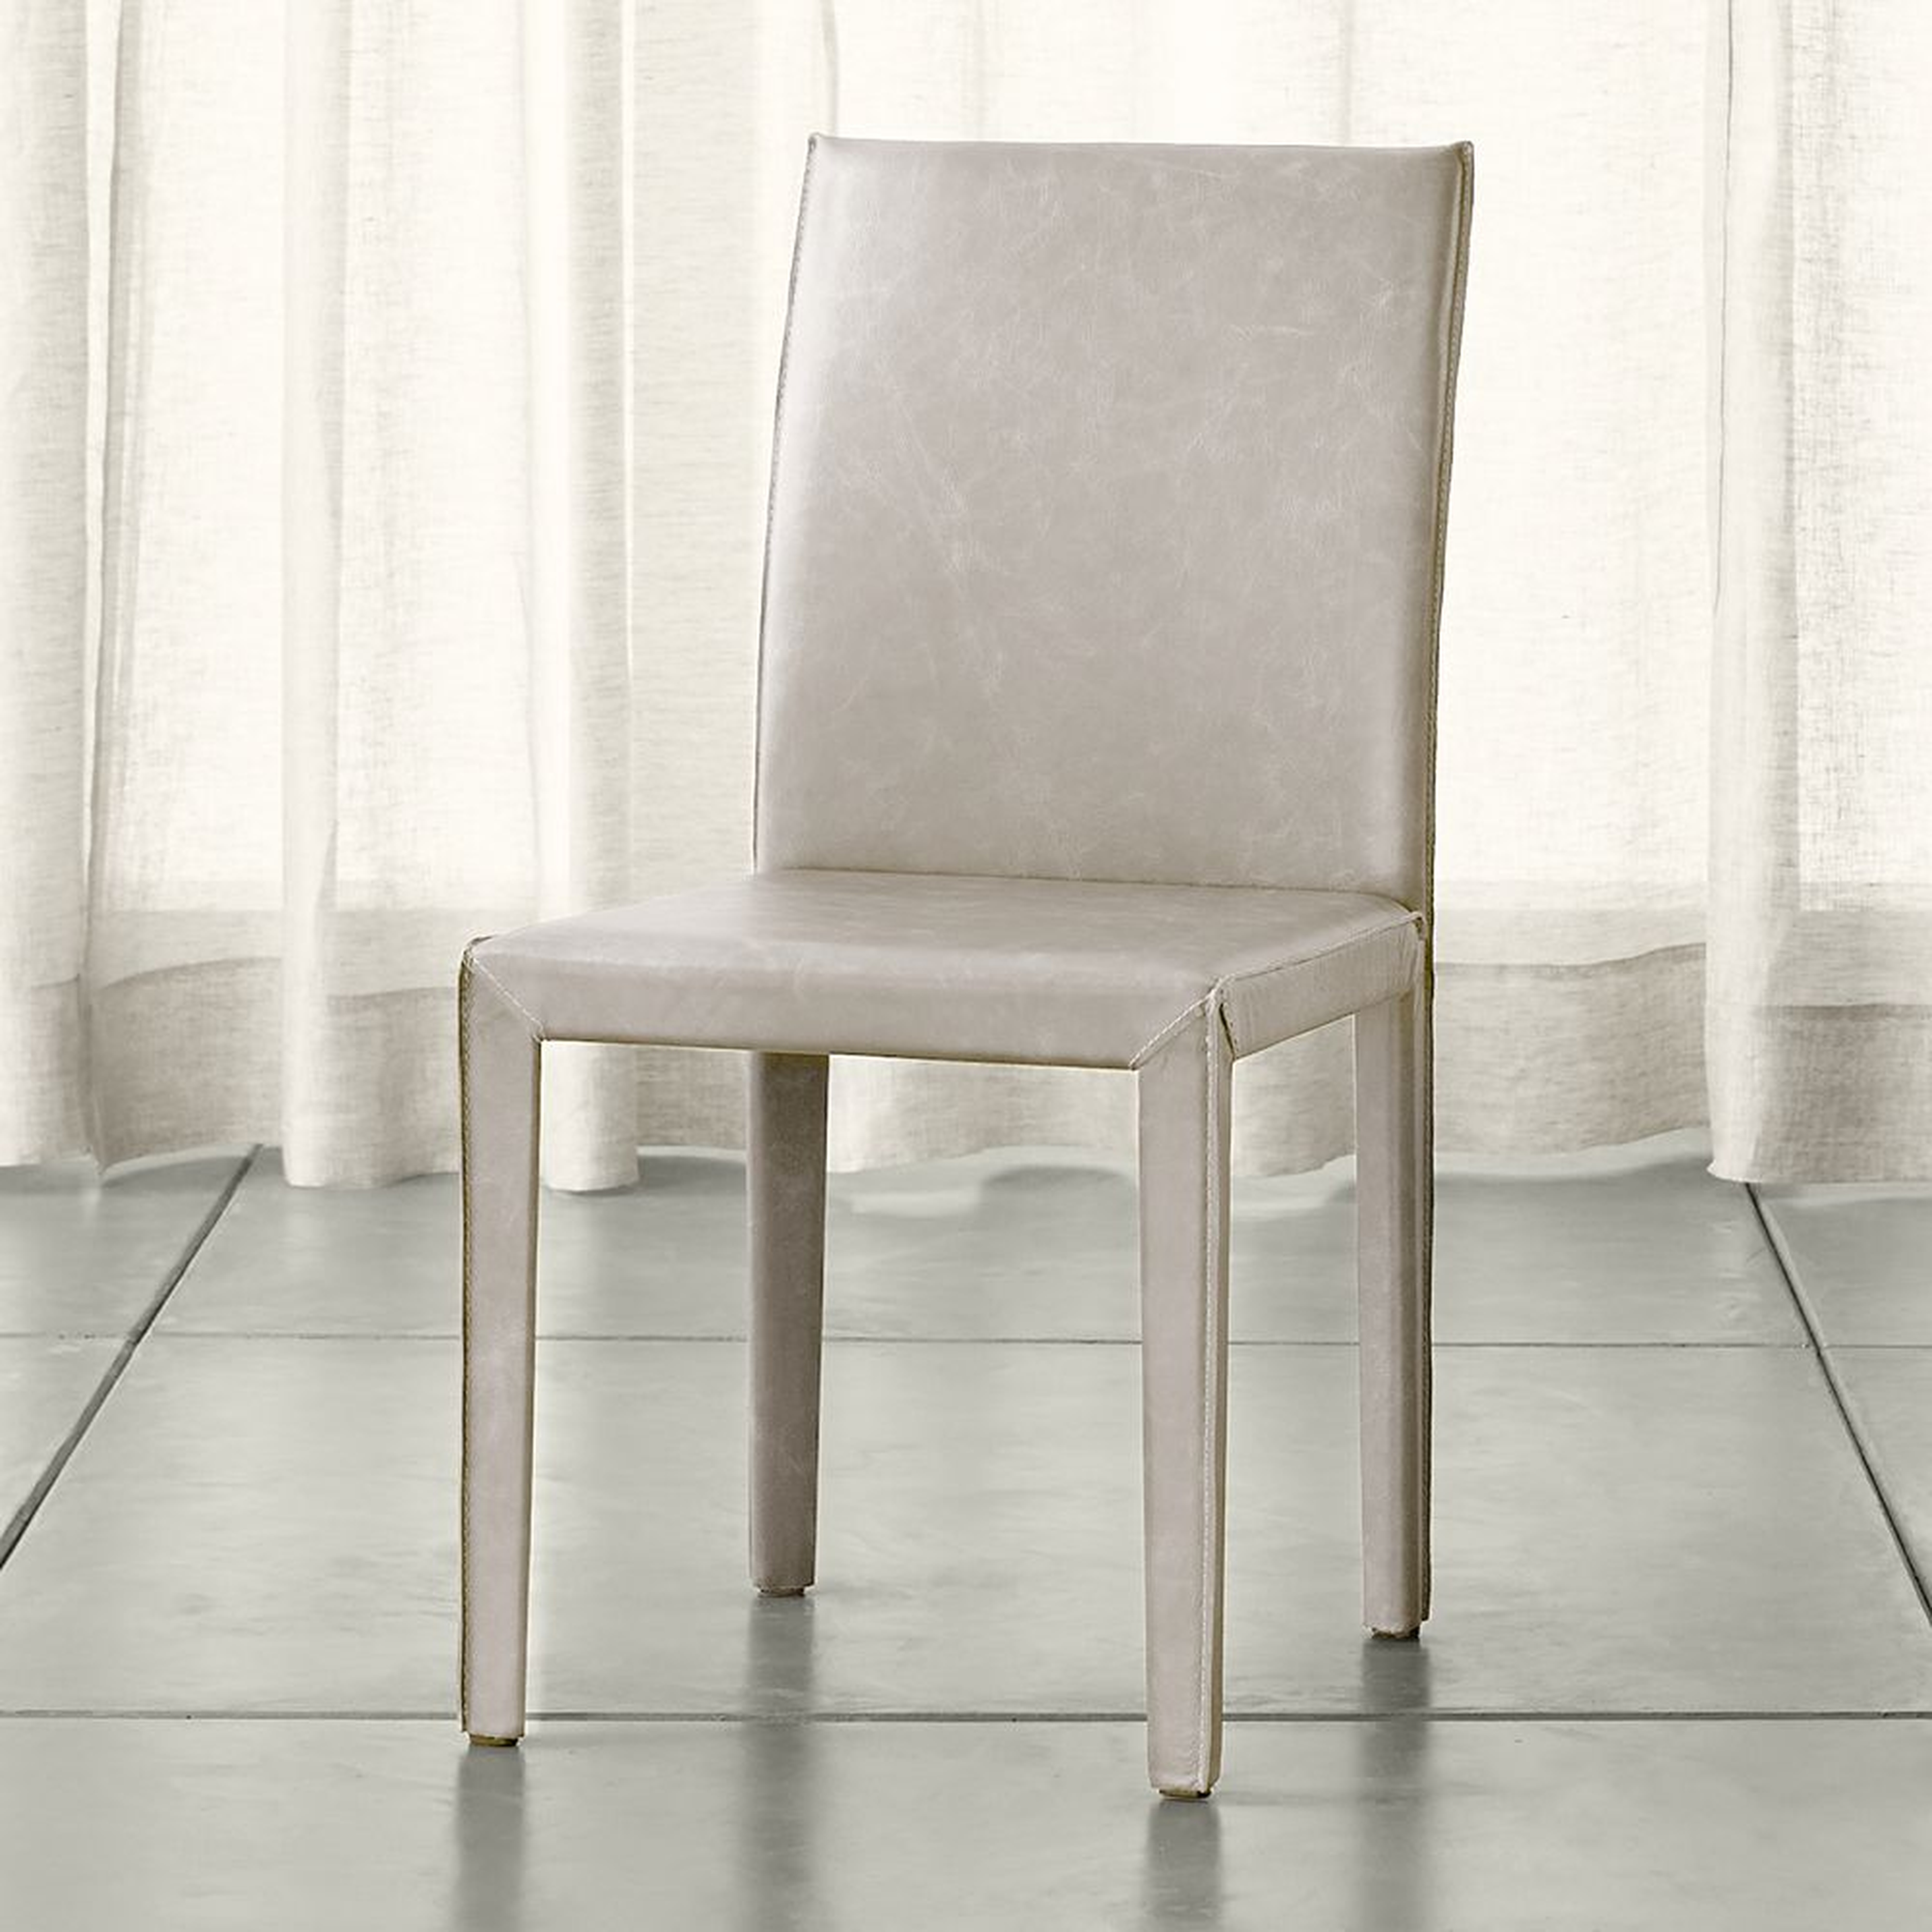 Folio Sand Top-Grain Leather Dining Chair - Crate and Barrel